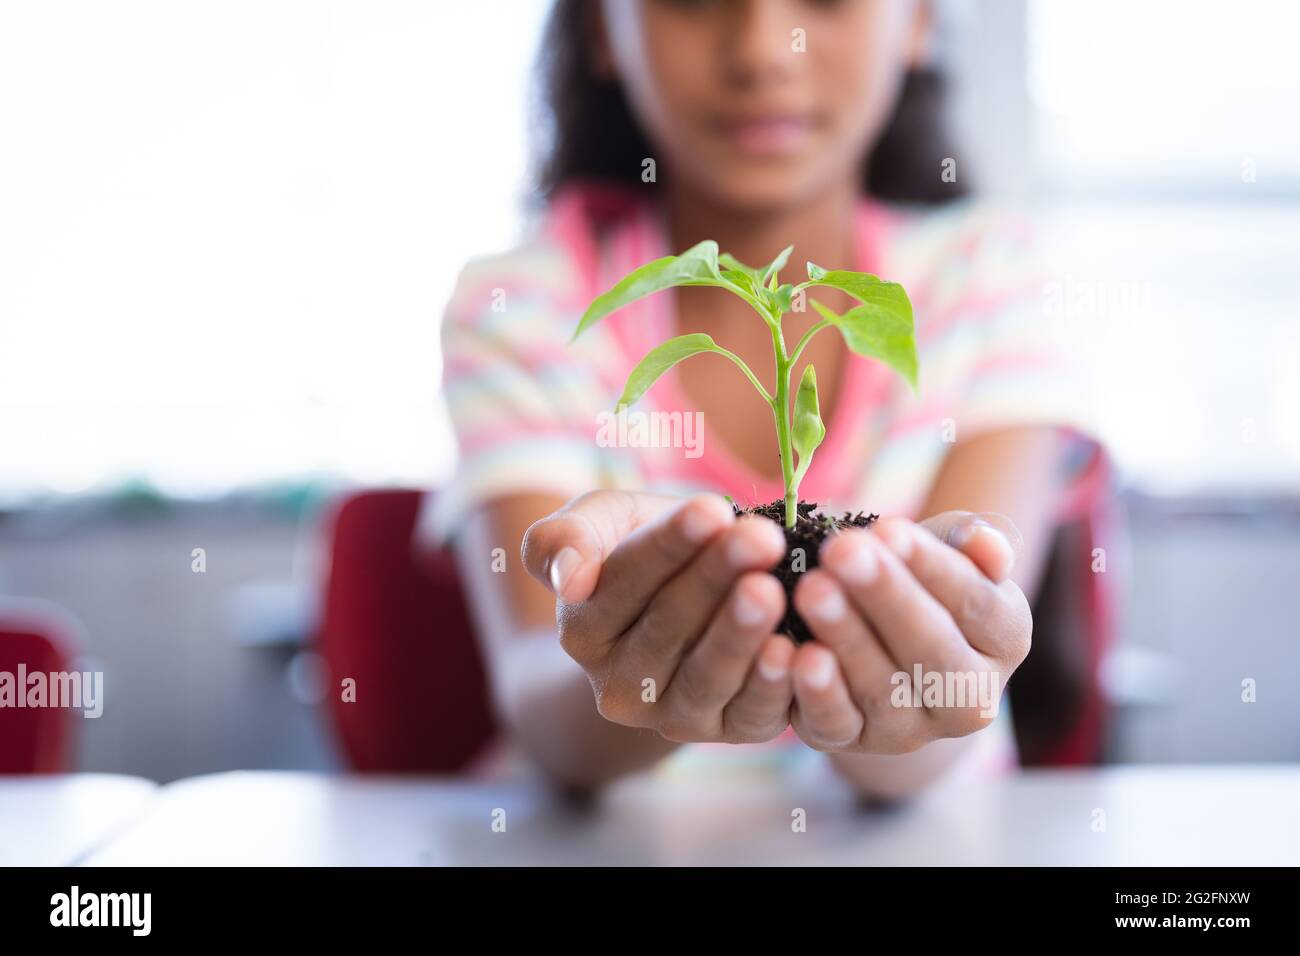 Mid section of girl holding a plant seedling while sitting on her desk in class at school Stock Photo